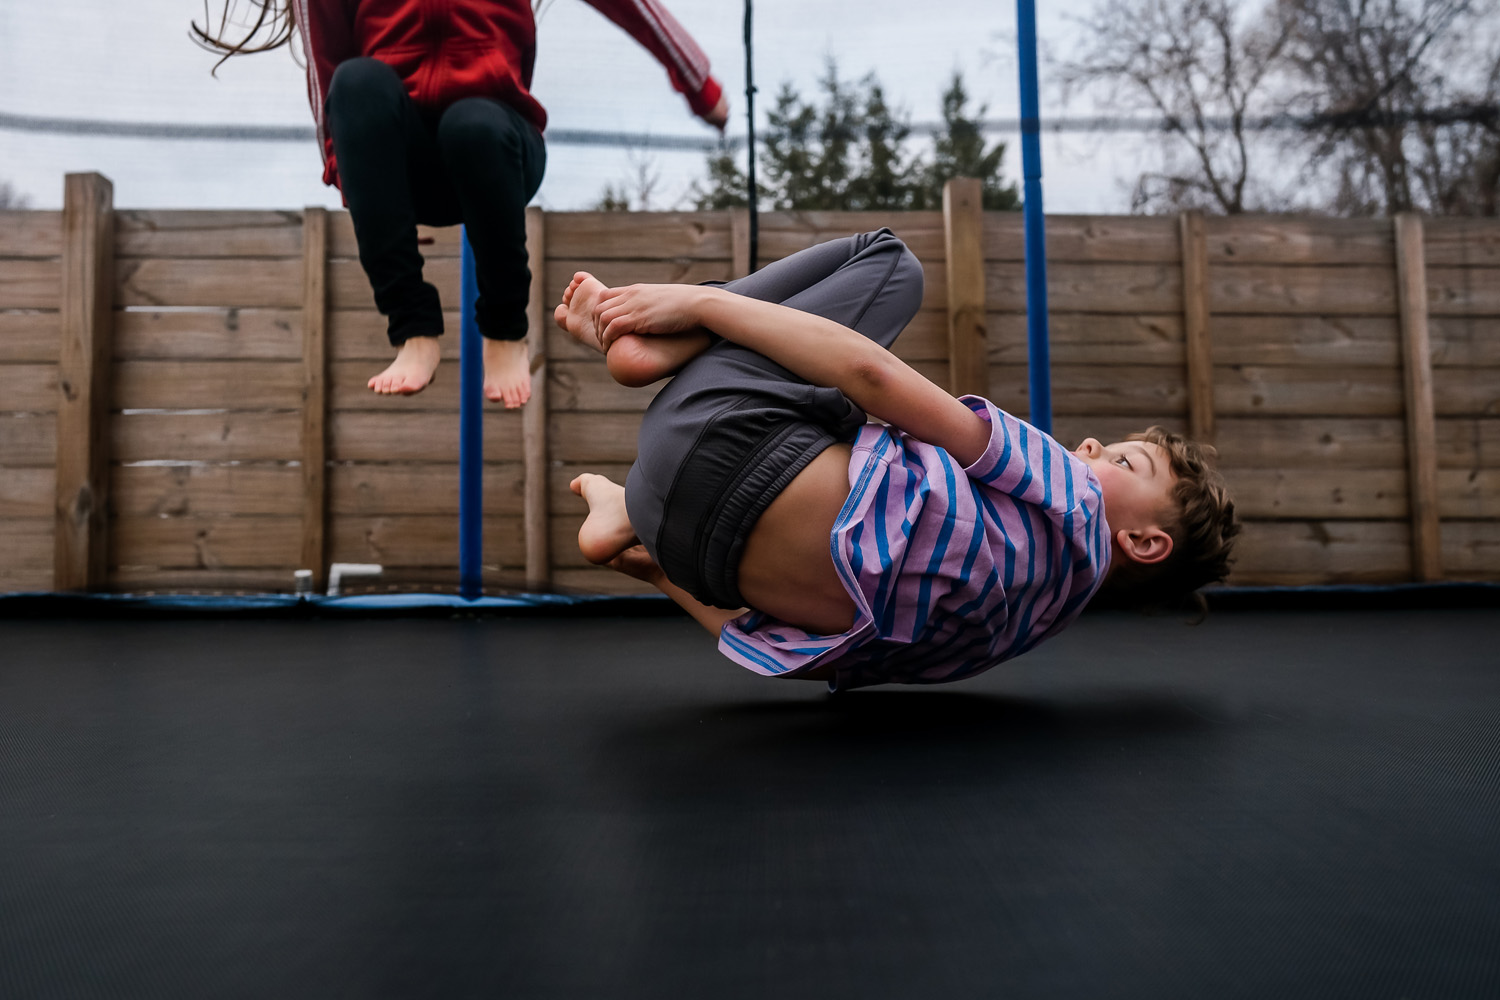 Boy in mid air bouncing on a trampoline while in the foetal position